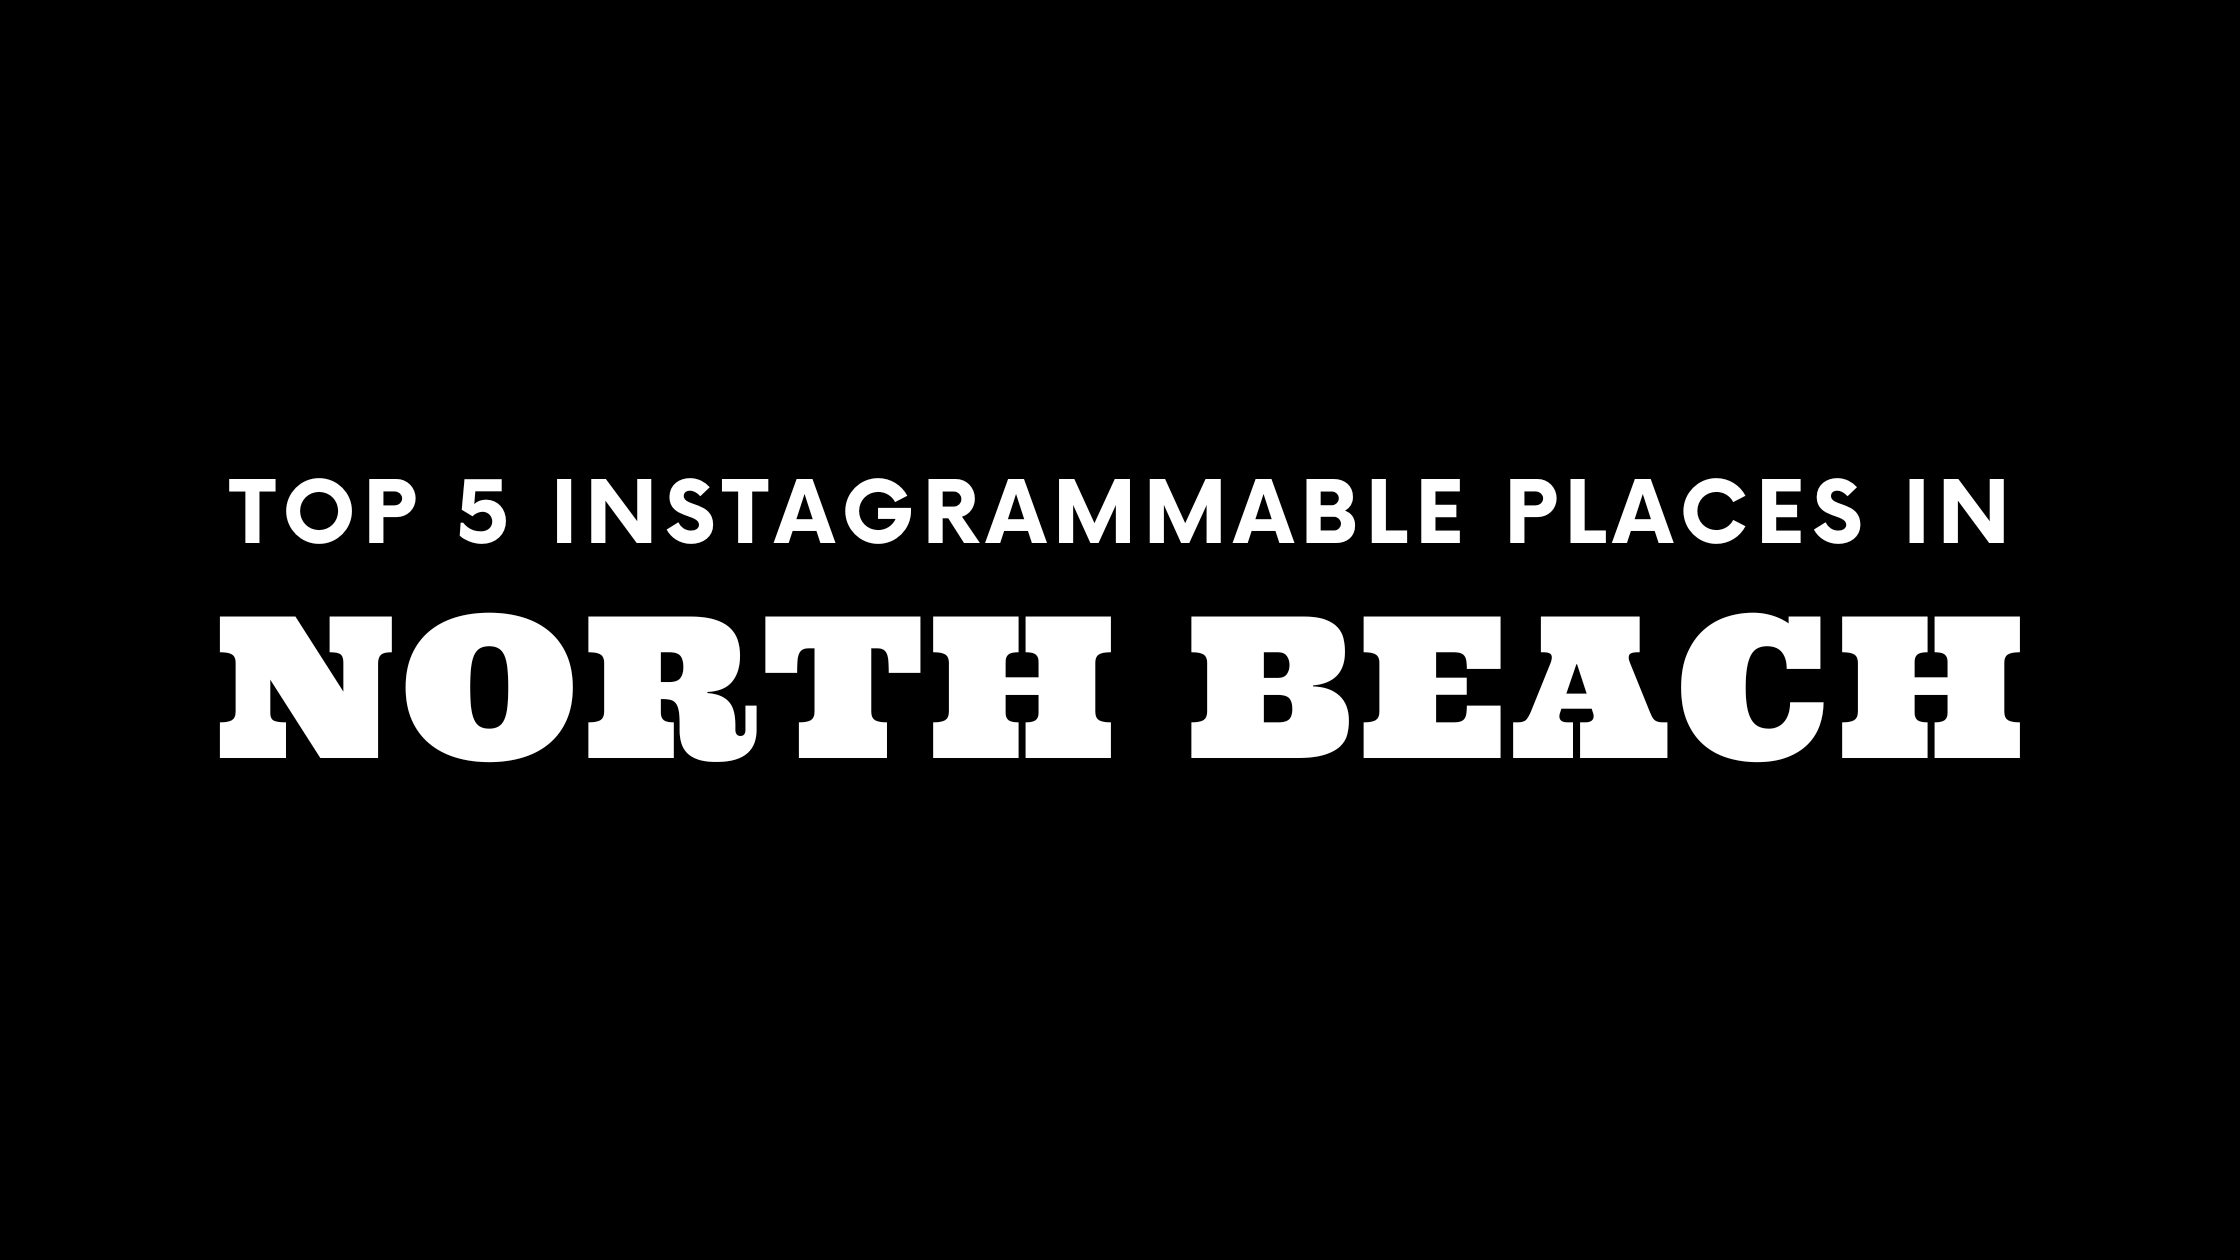 Top 5 Instagrammable Places in North Beach